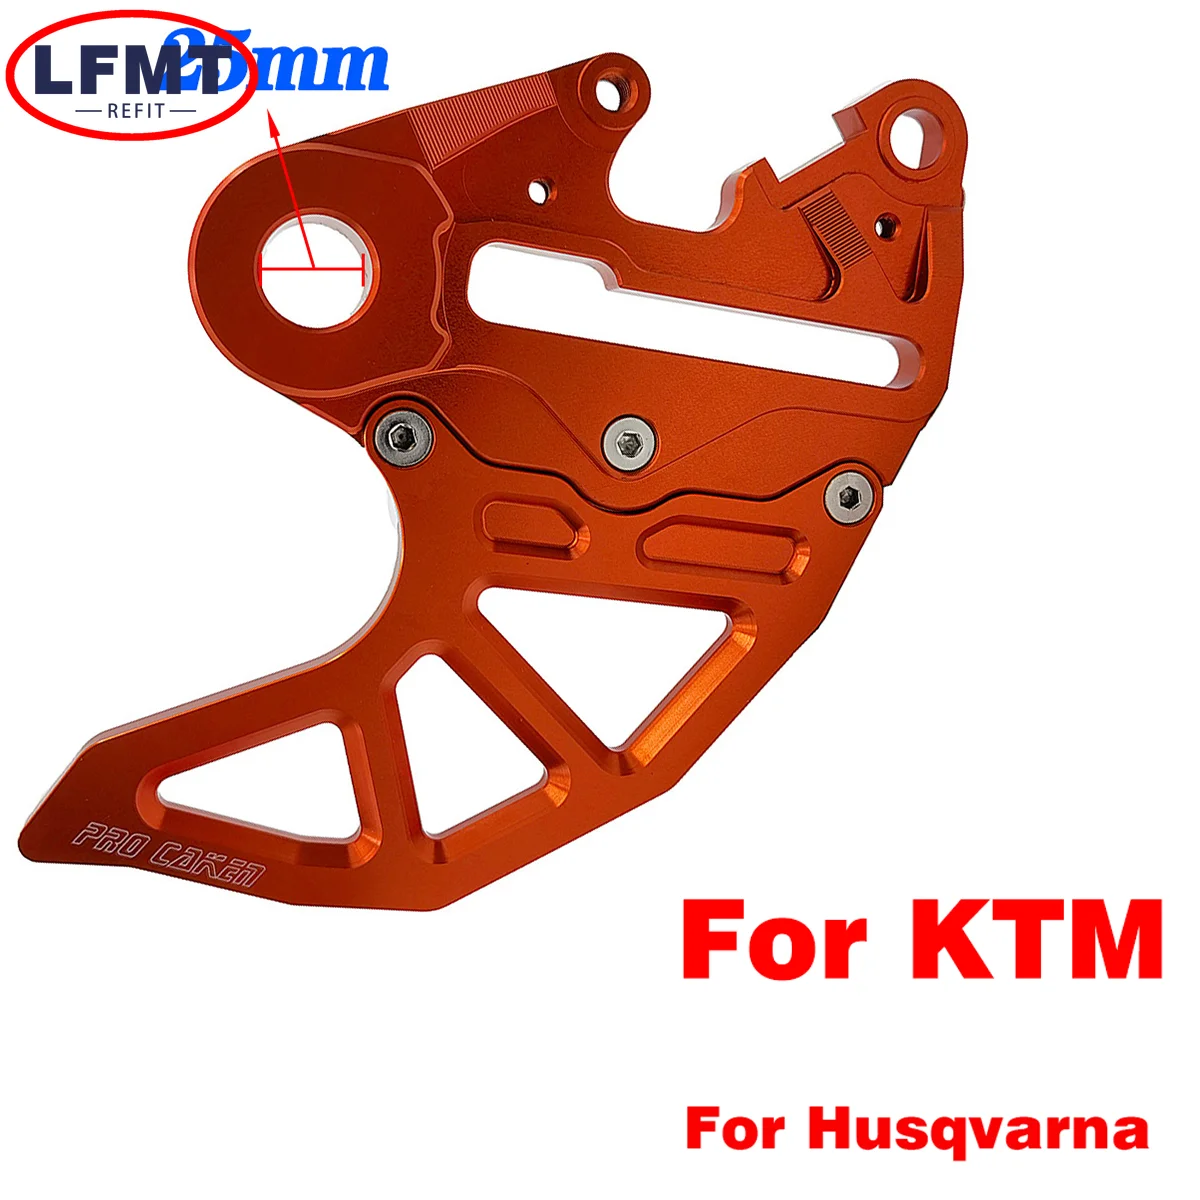 

For KTM SX SXF SMR XC XCF XCW EXC EXCF 6 Days TPI For Husqvarna TE FE FC TC Motocross 25mm Axle Rear Brake Disc Guard Protector